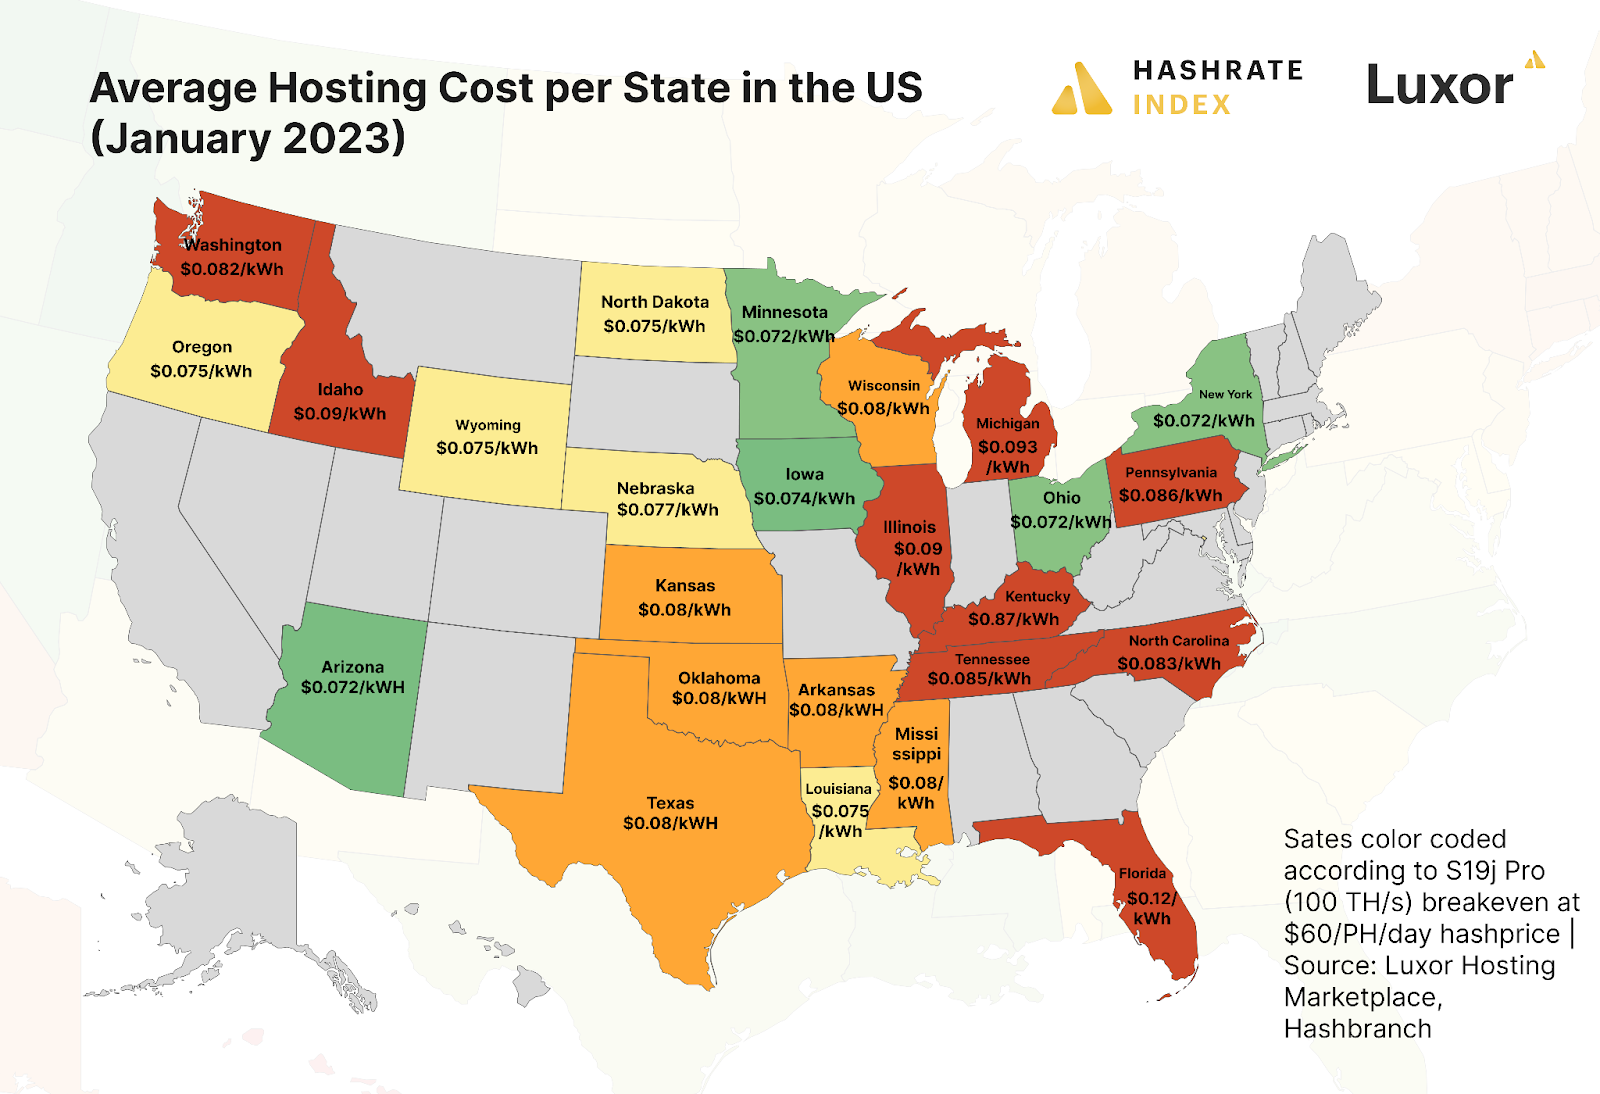 Average Bitcoin mining hosting rates in the US per state according to data from Luxor's hosting marketplace and Hashbranch